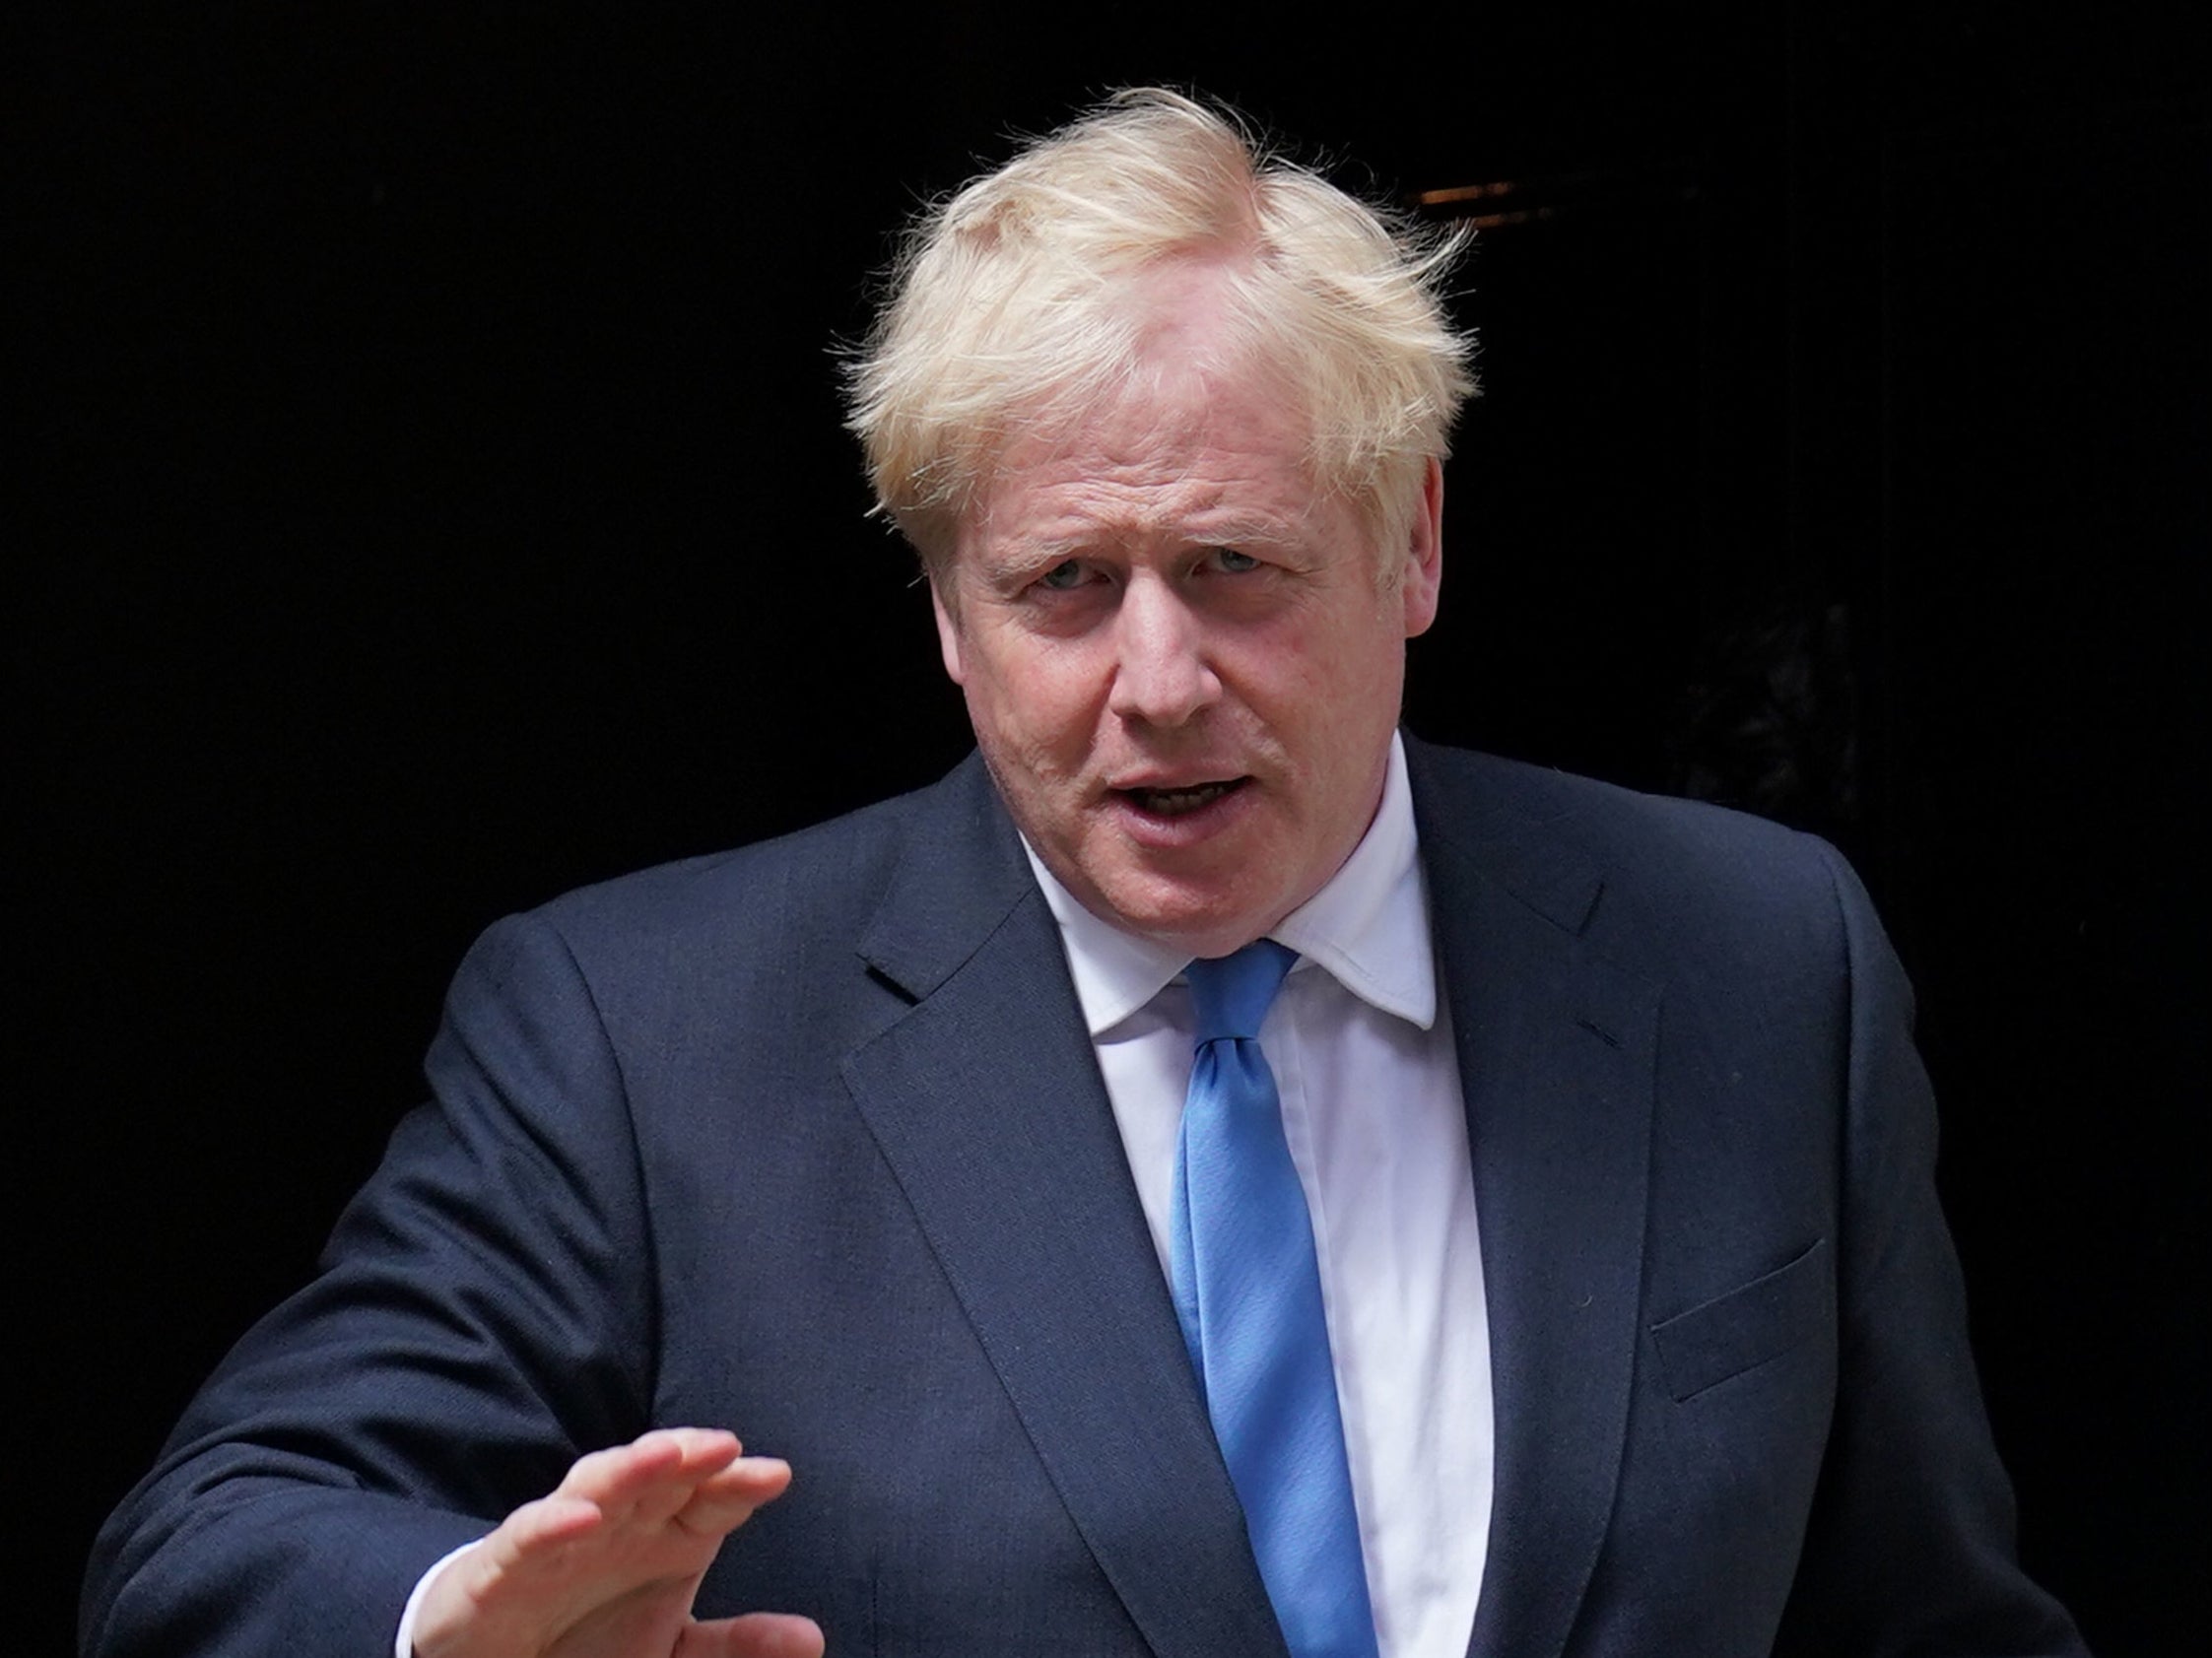 No 10 claimed Boris Johnson did not know about the allegations before giving Chris Pincher a senior job in government